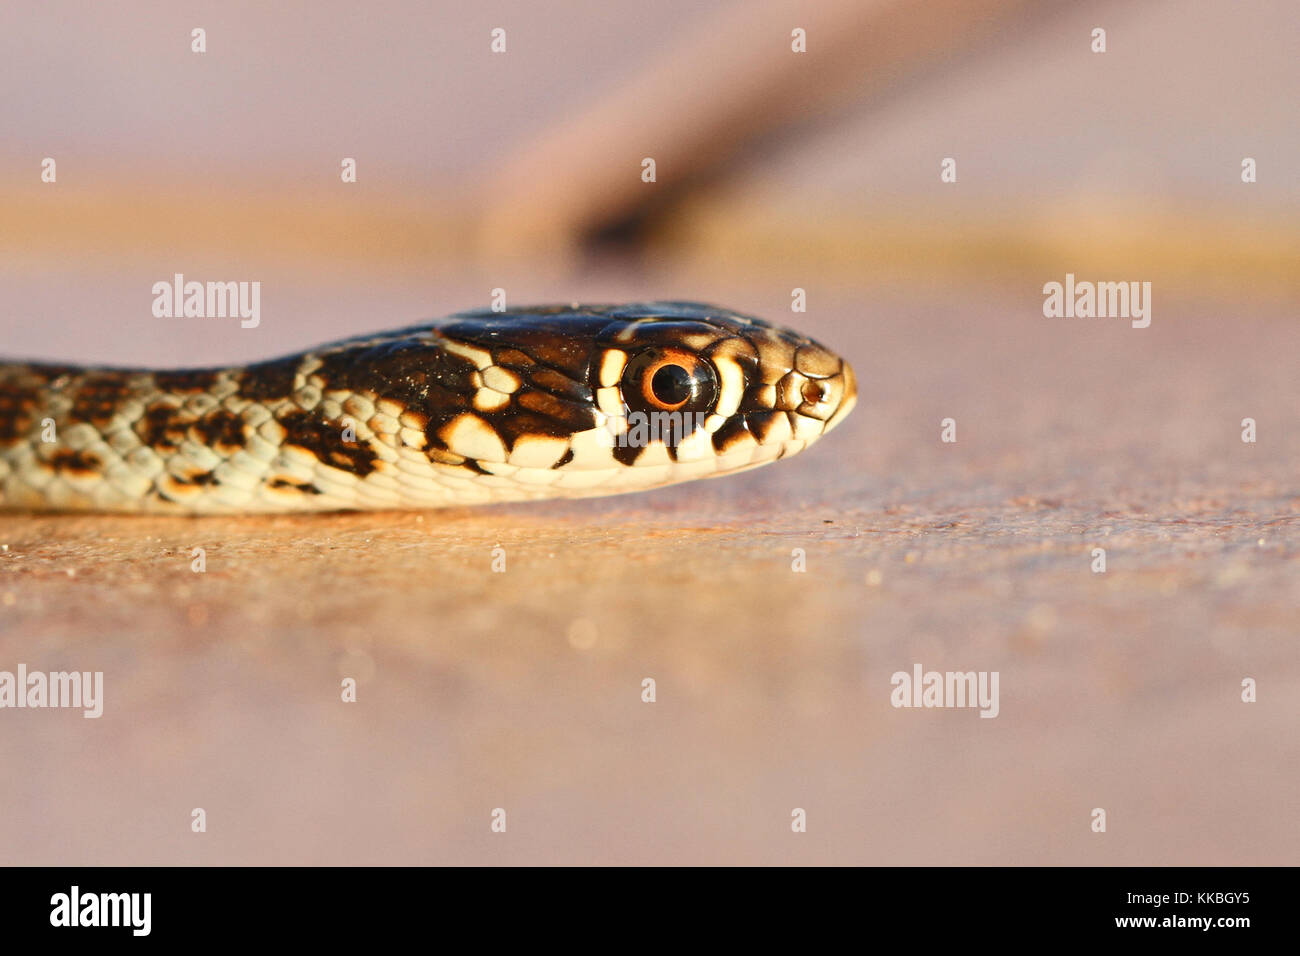 Green or Western whipsnake or whip snake close up in Italy Latin name hierophis or coluber viridiflavus Stock Photo